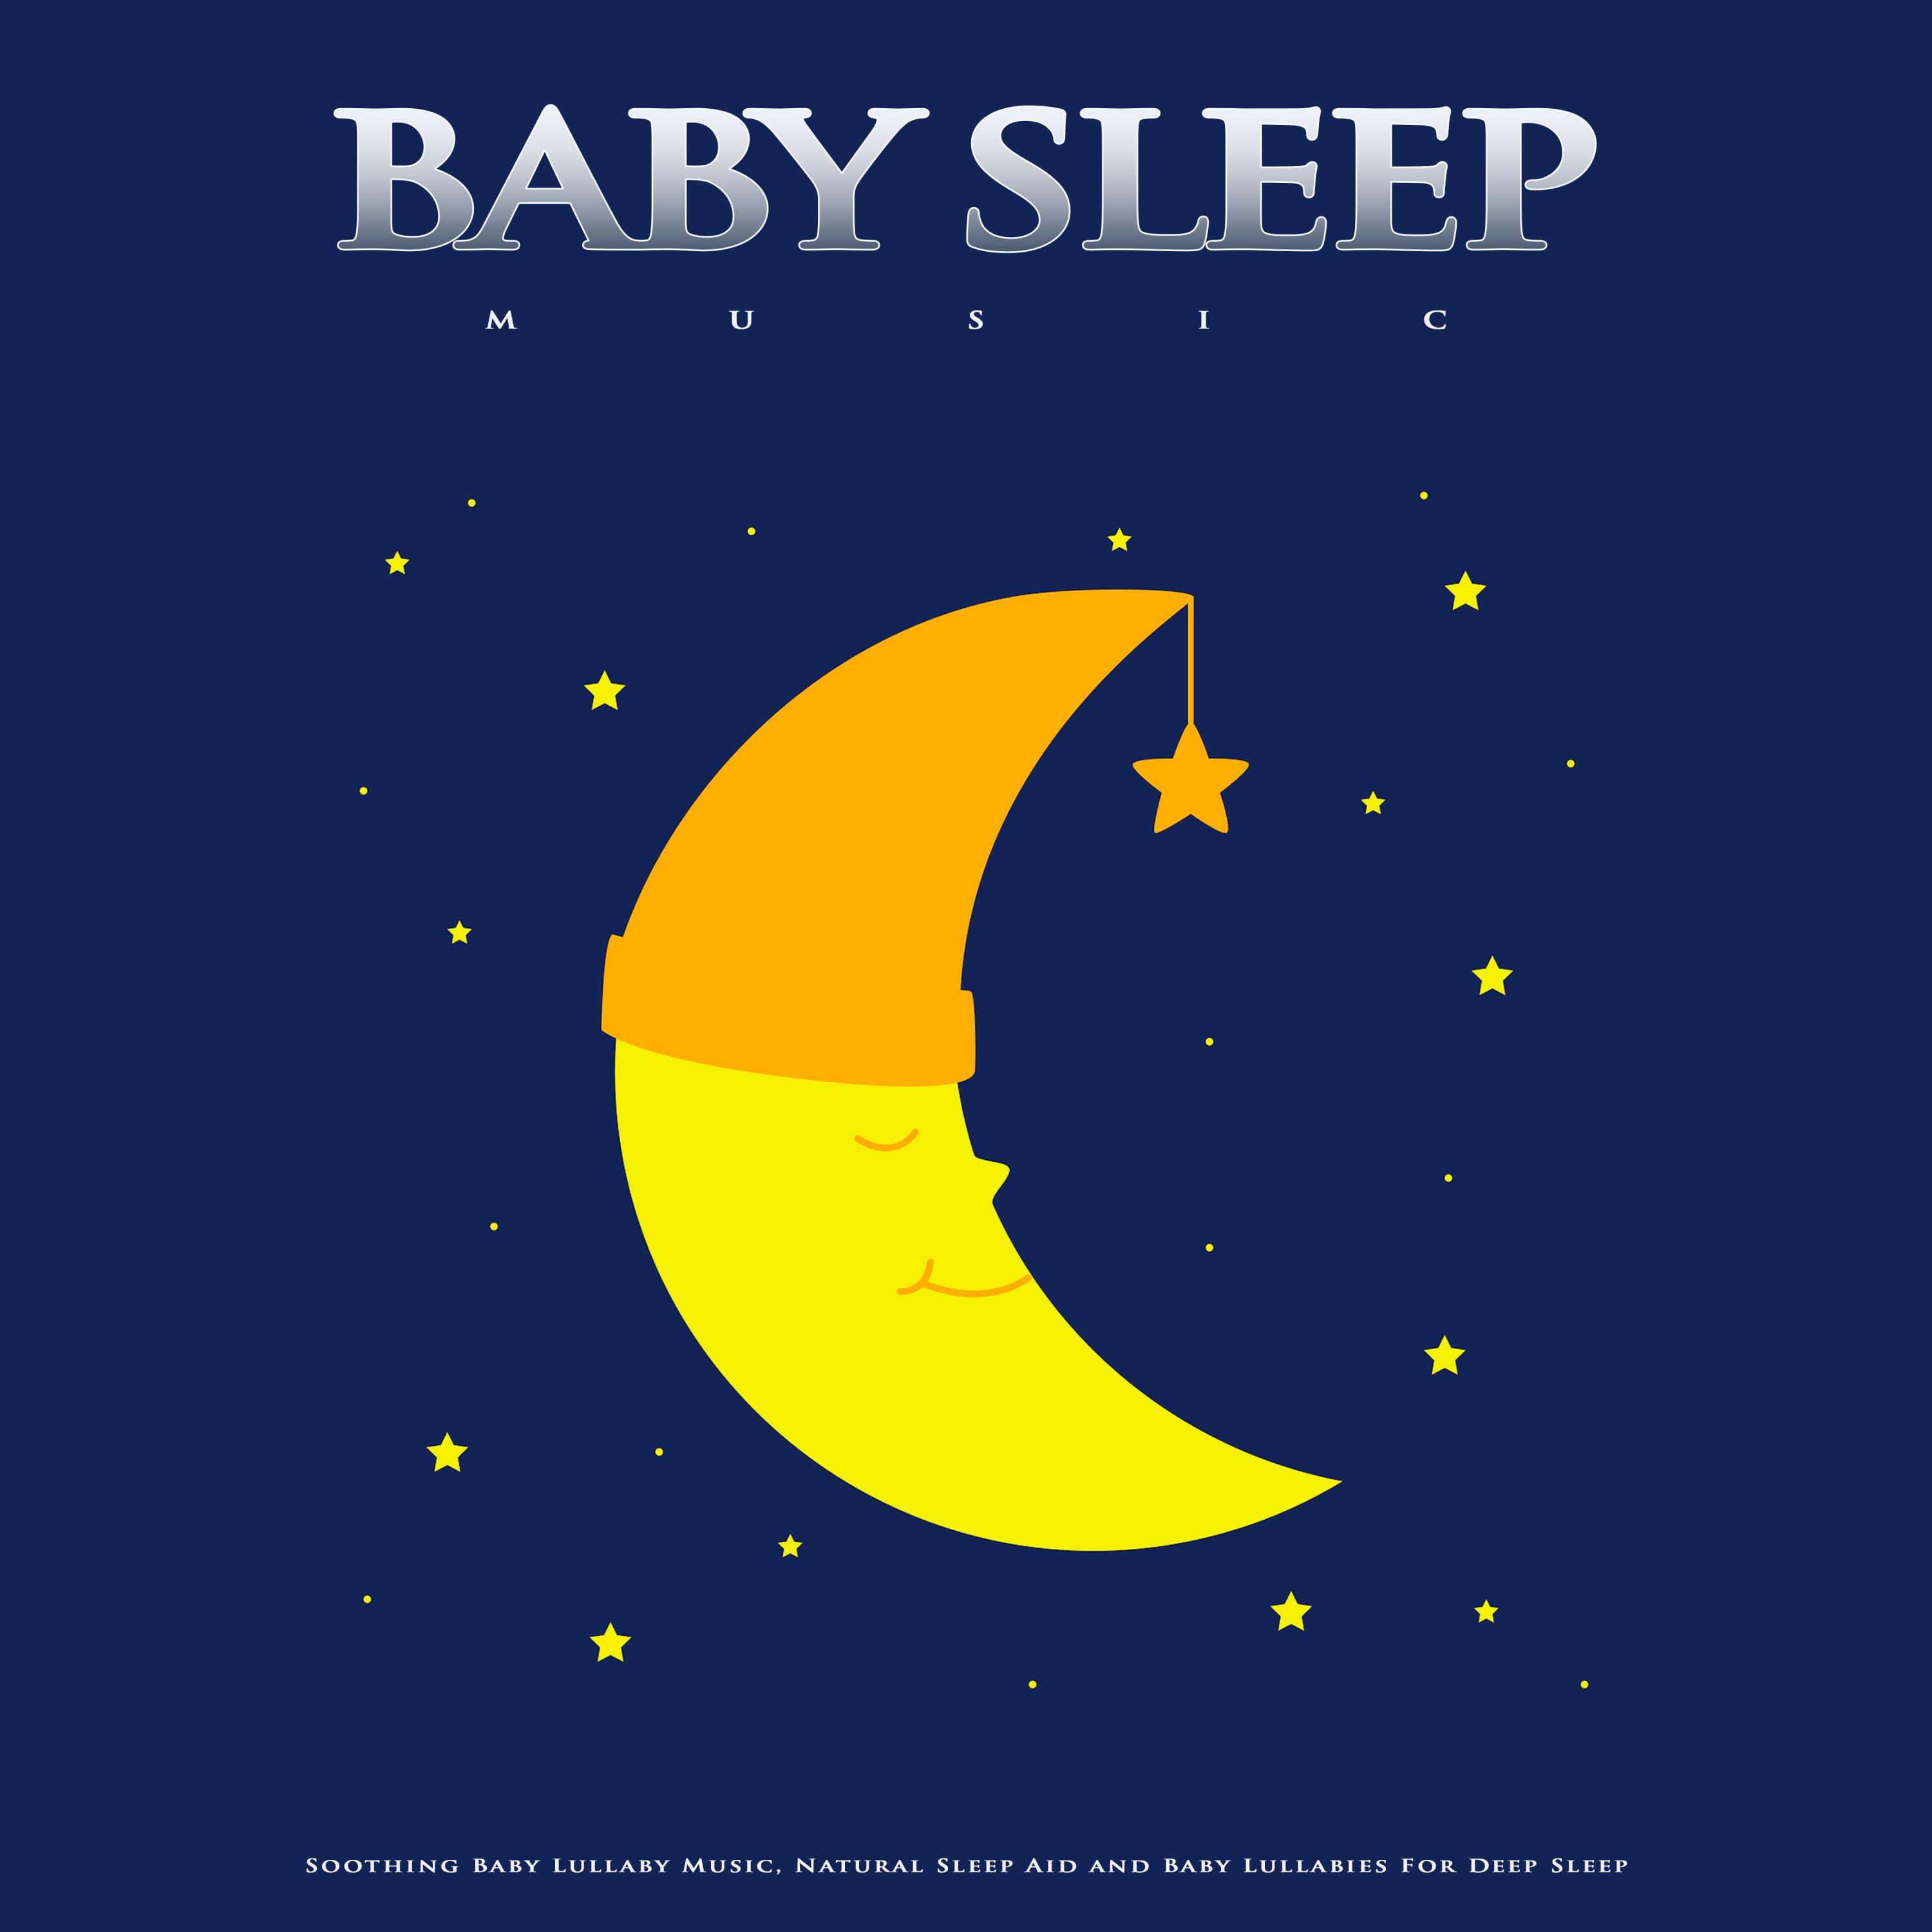 Calm Baby Lullaby Music